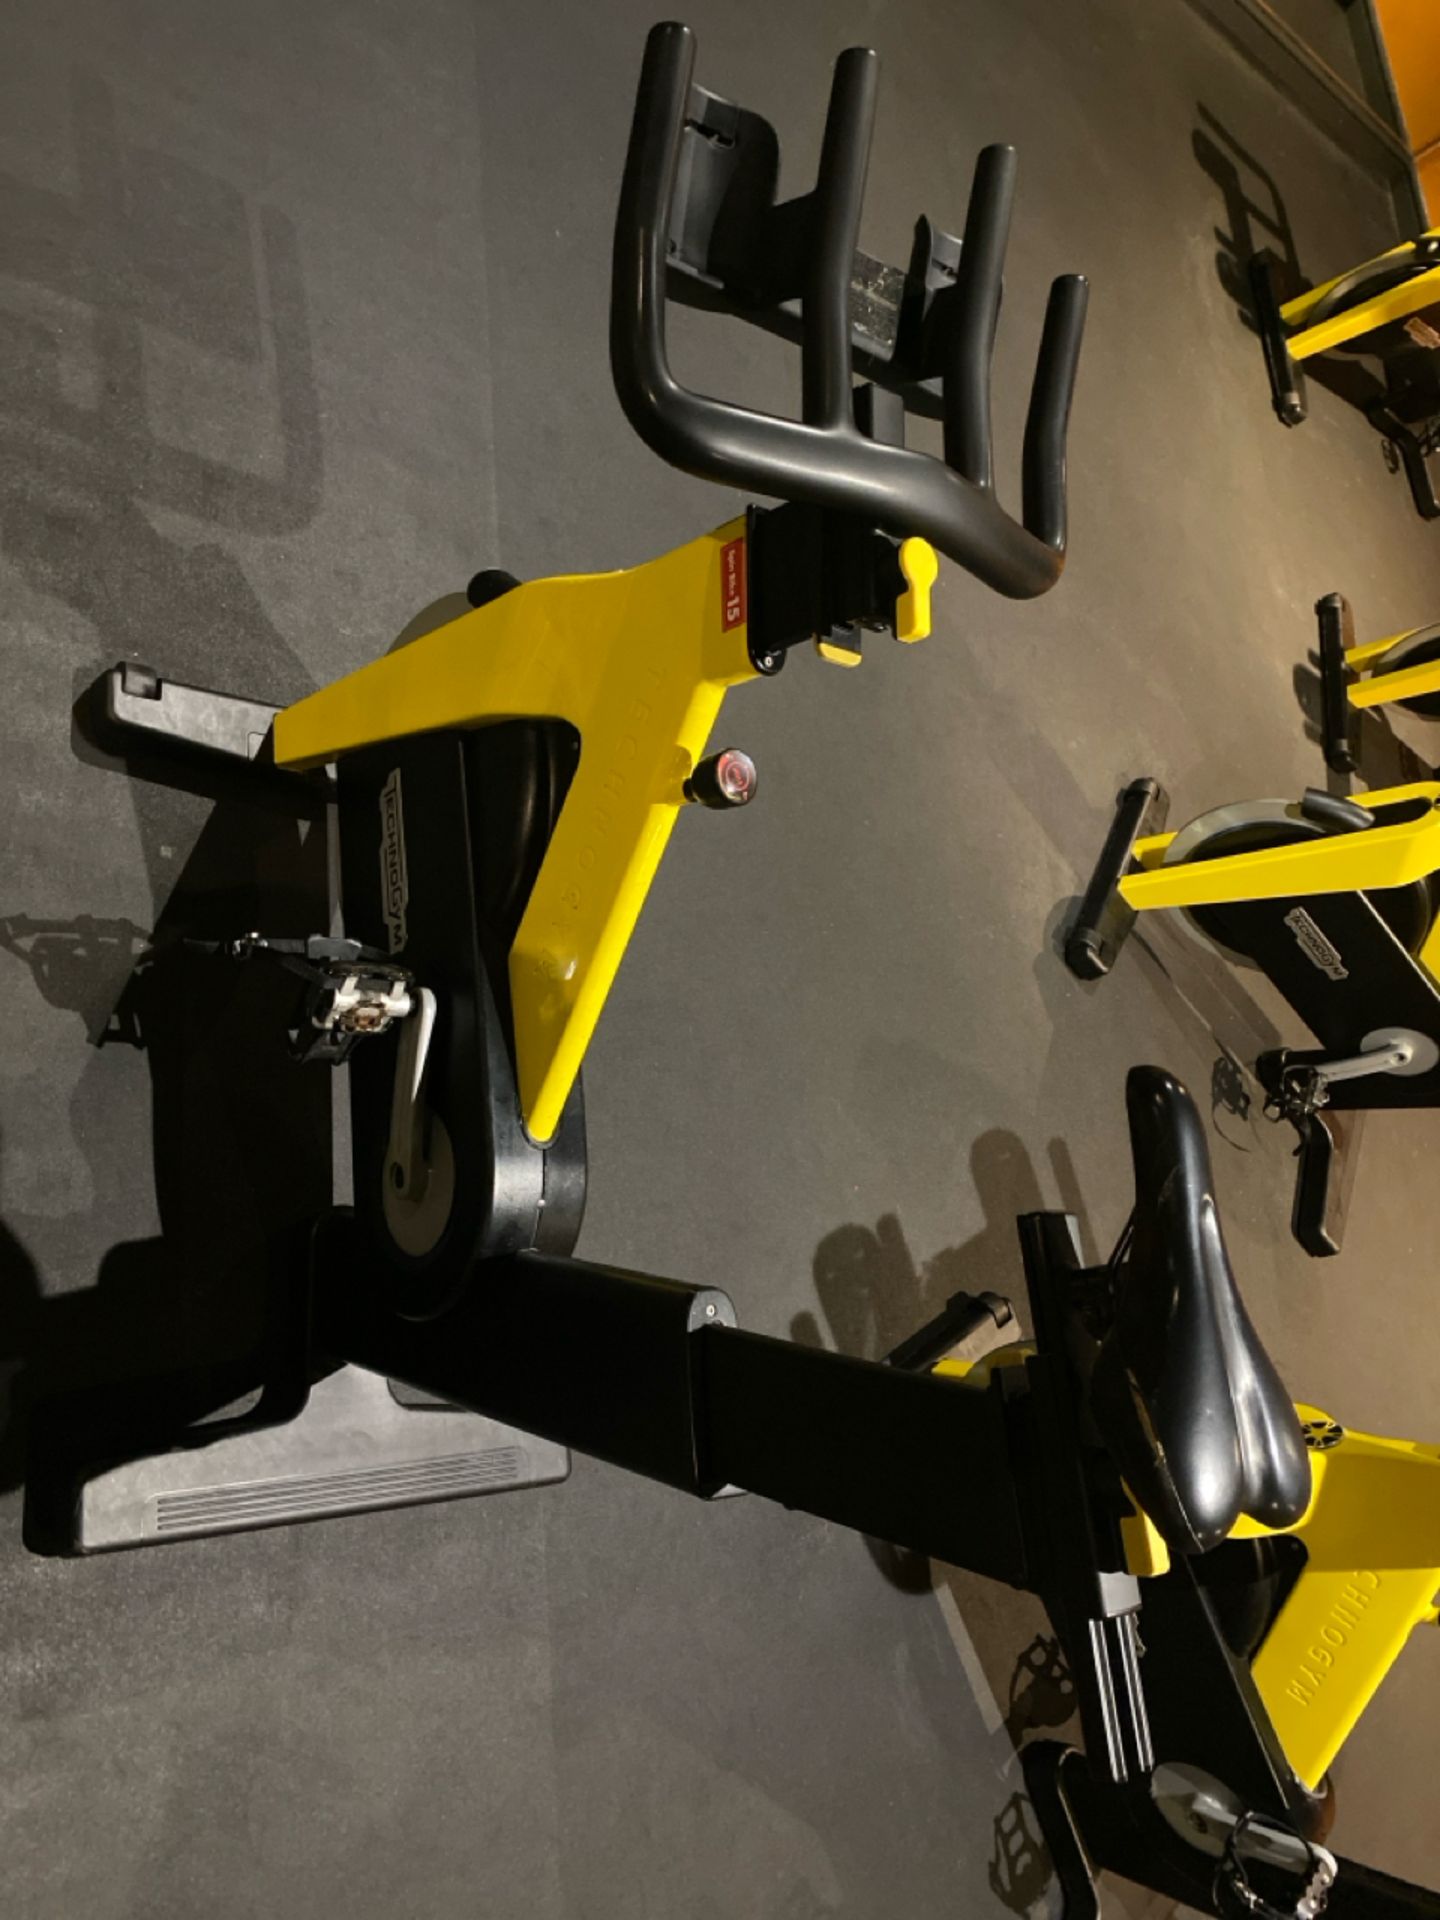 Technogym Group Cycle Ride Spin Bike - Image 4 of 8